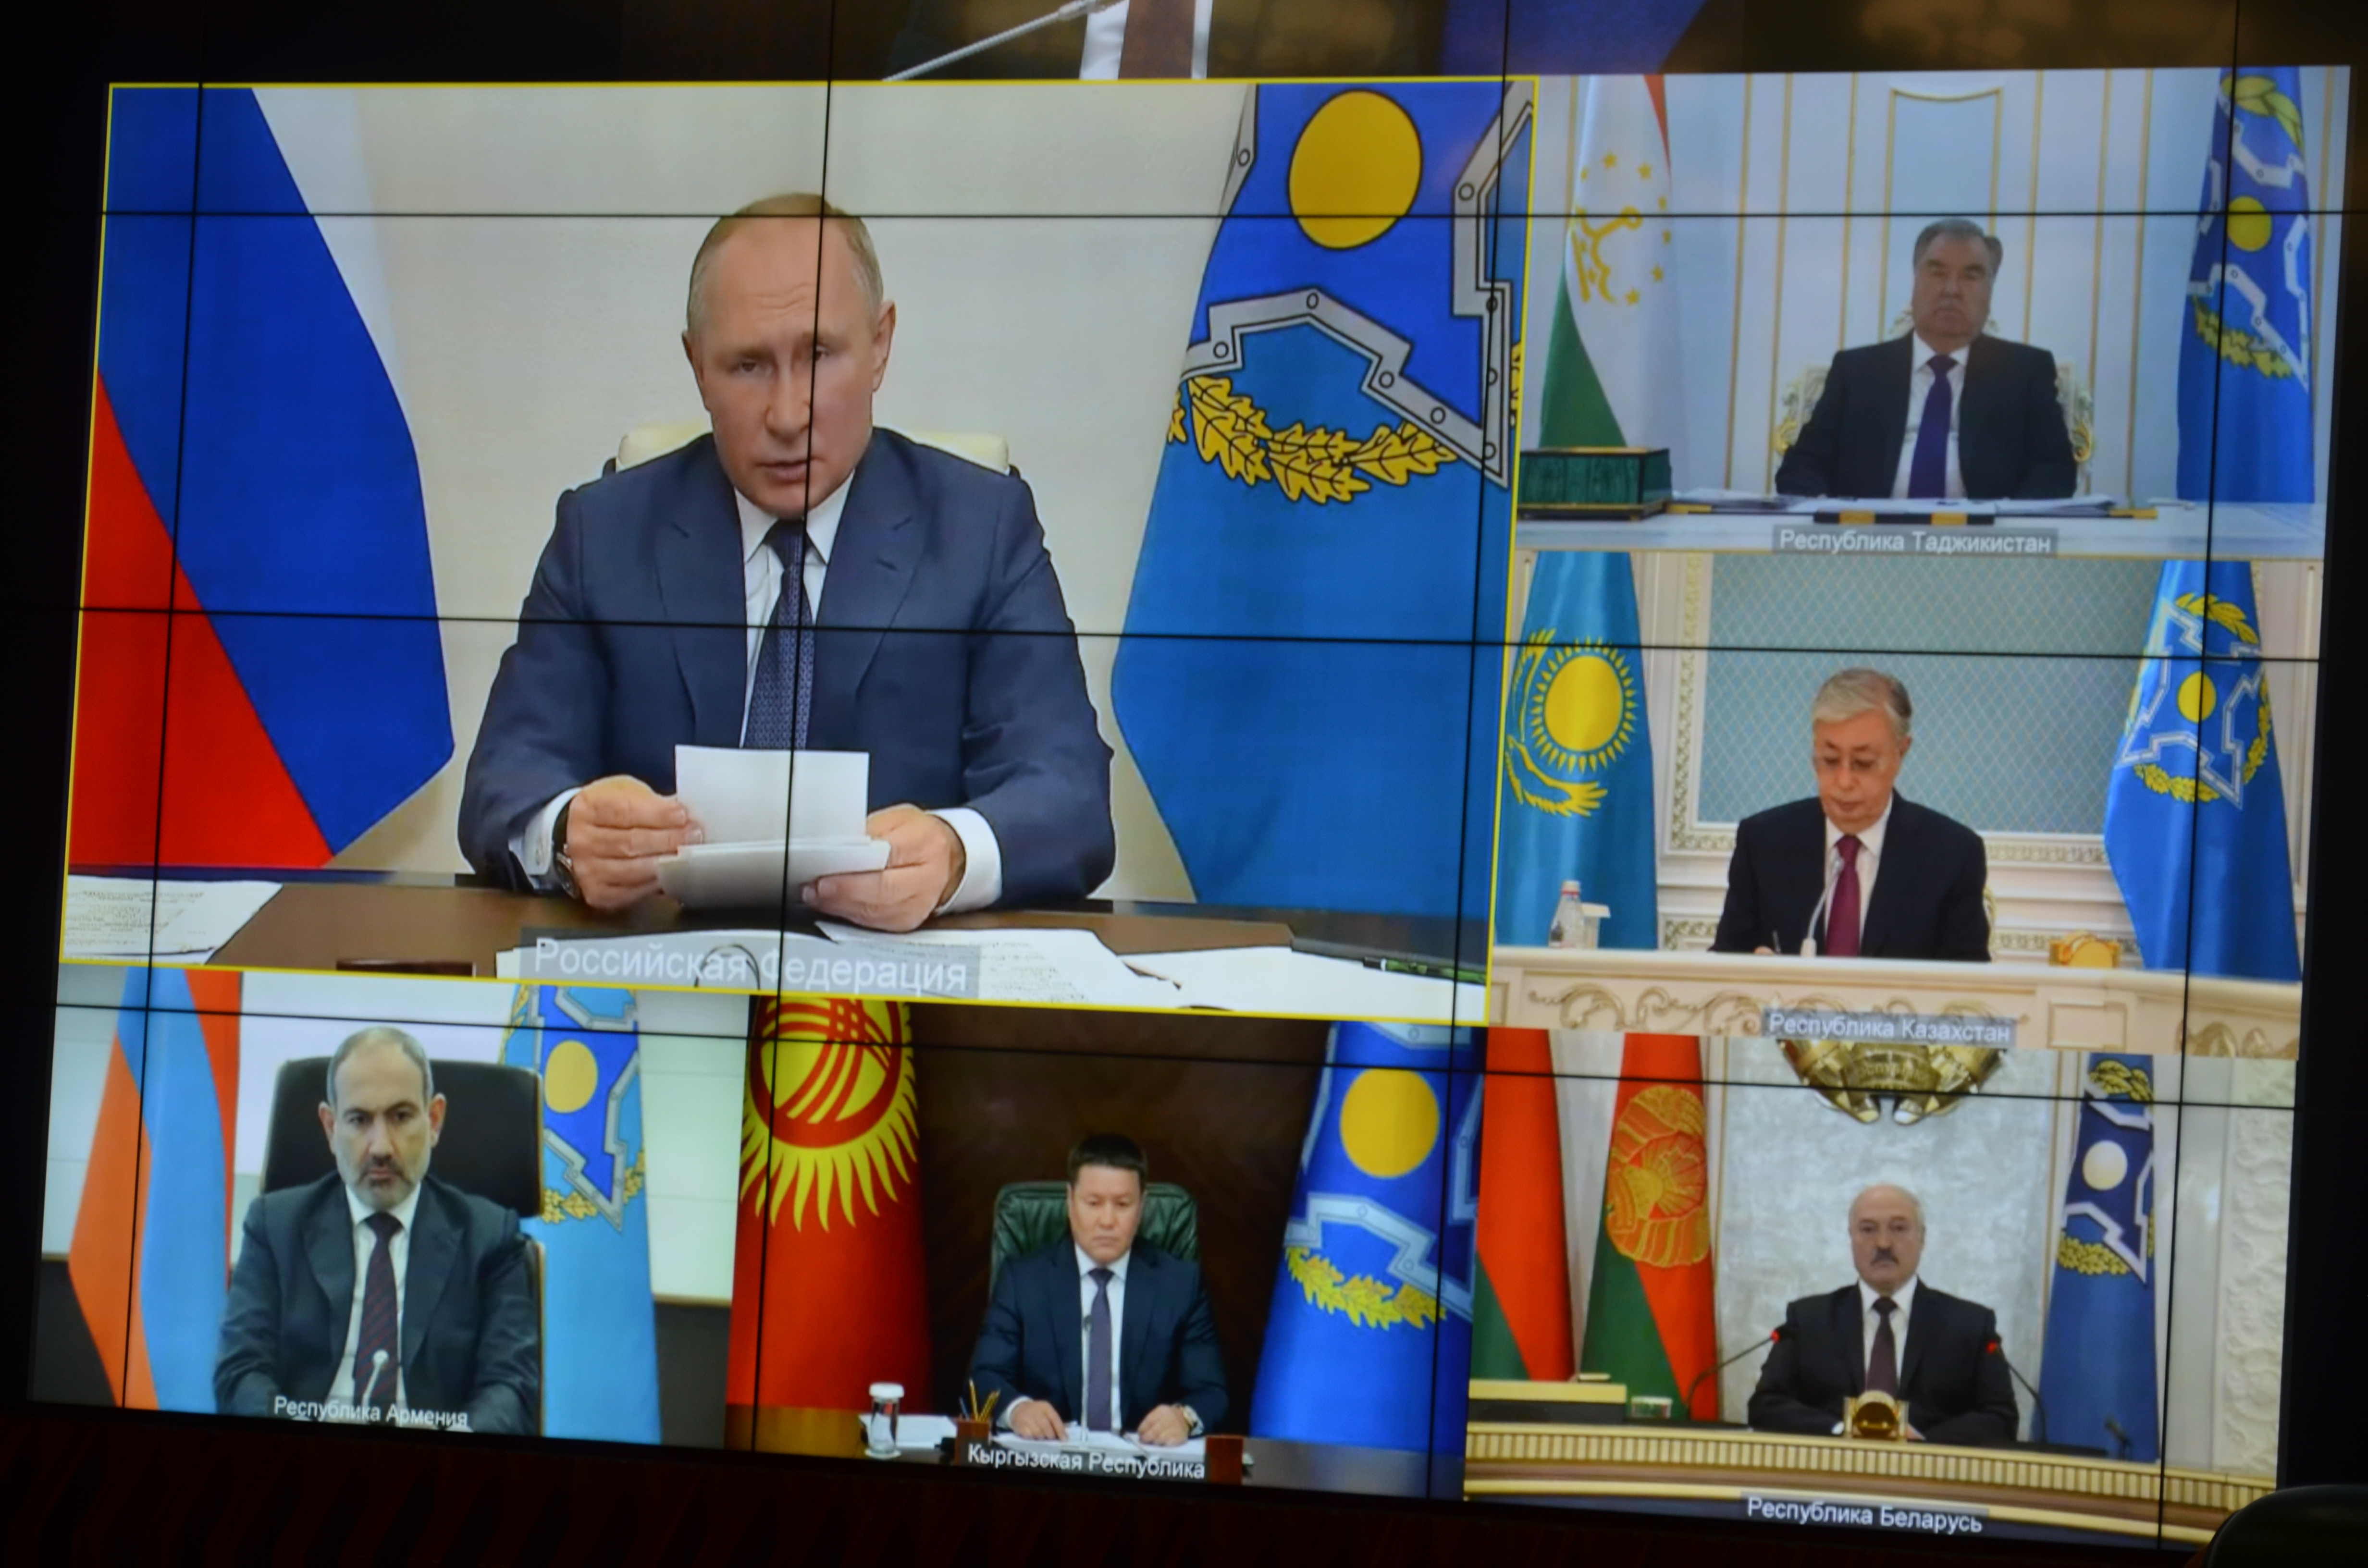 On December 2, 2020, for the first time, a session of the CSTO Collective Security Council was held by videoconference